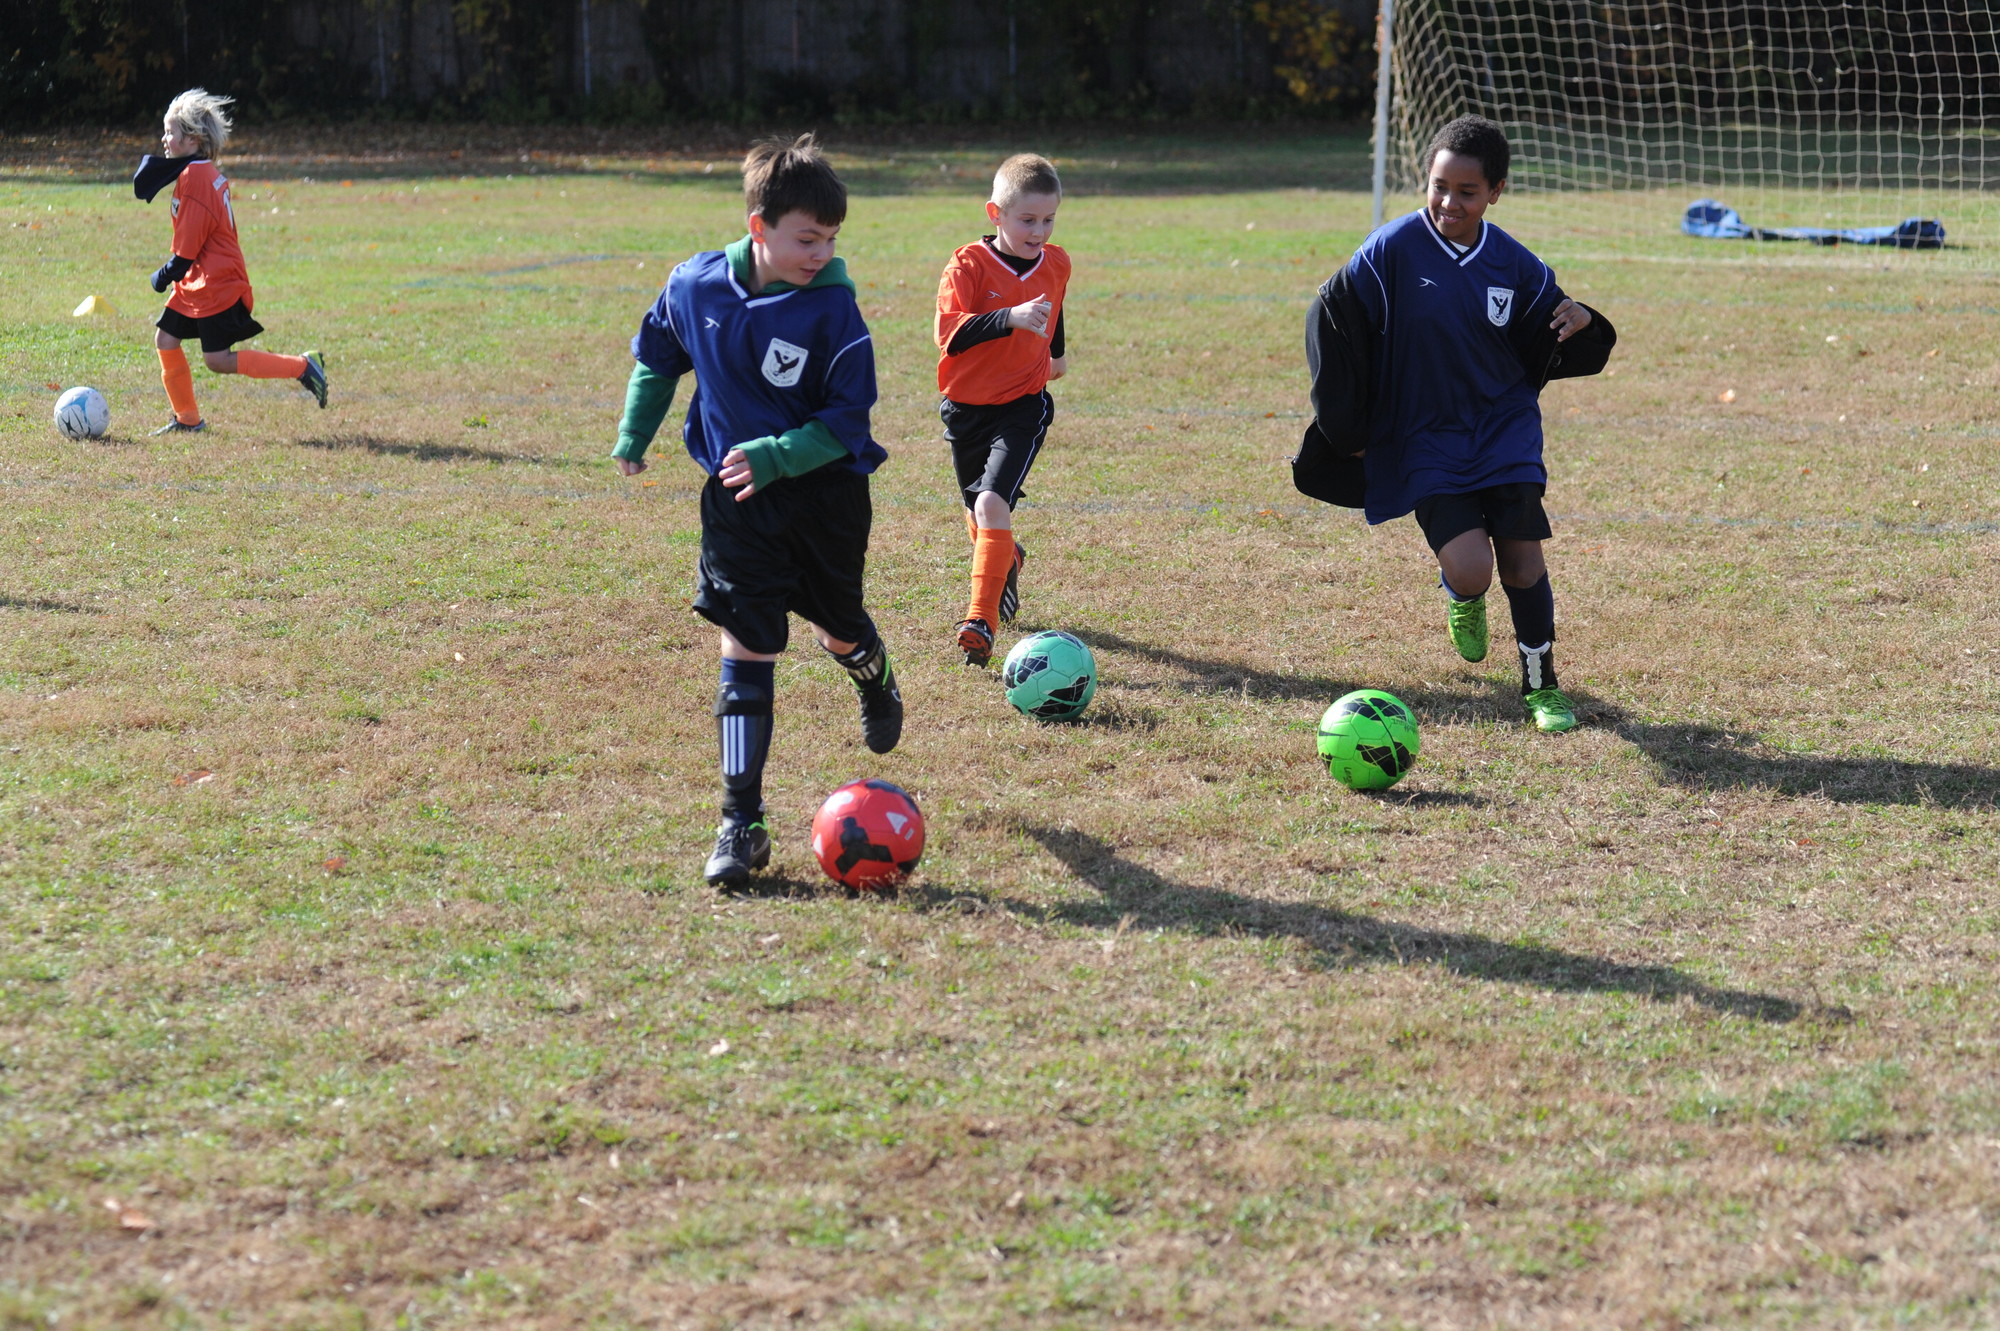 Kids were all smiles last weekend during the slate of Baldwin Eagles Soccer Club matches at Lenox Elementary School.